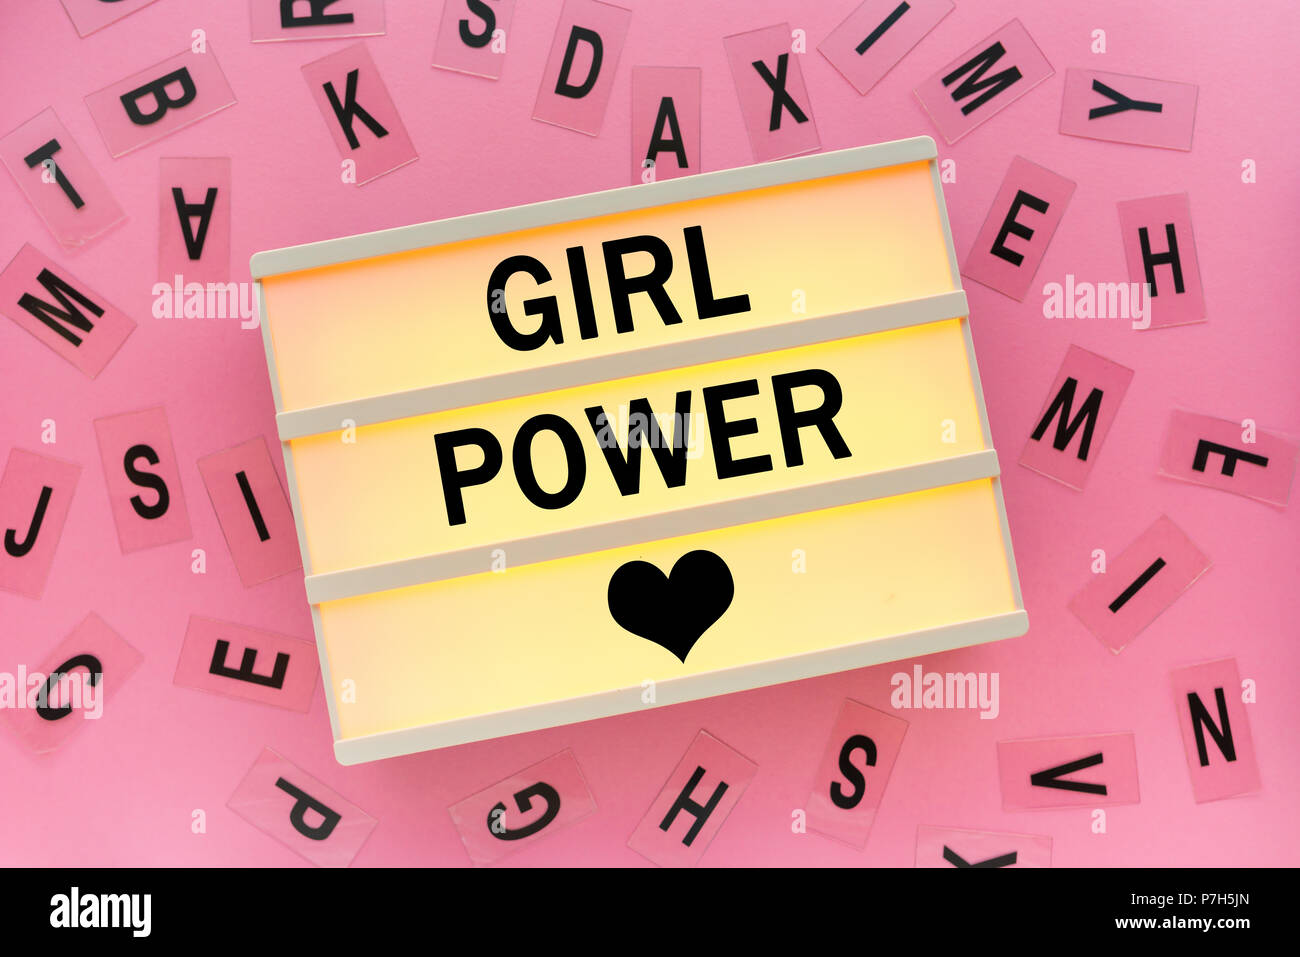 Girl power concept with text on lightbox Stock Photo